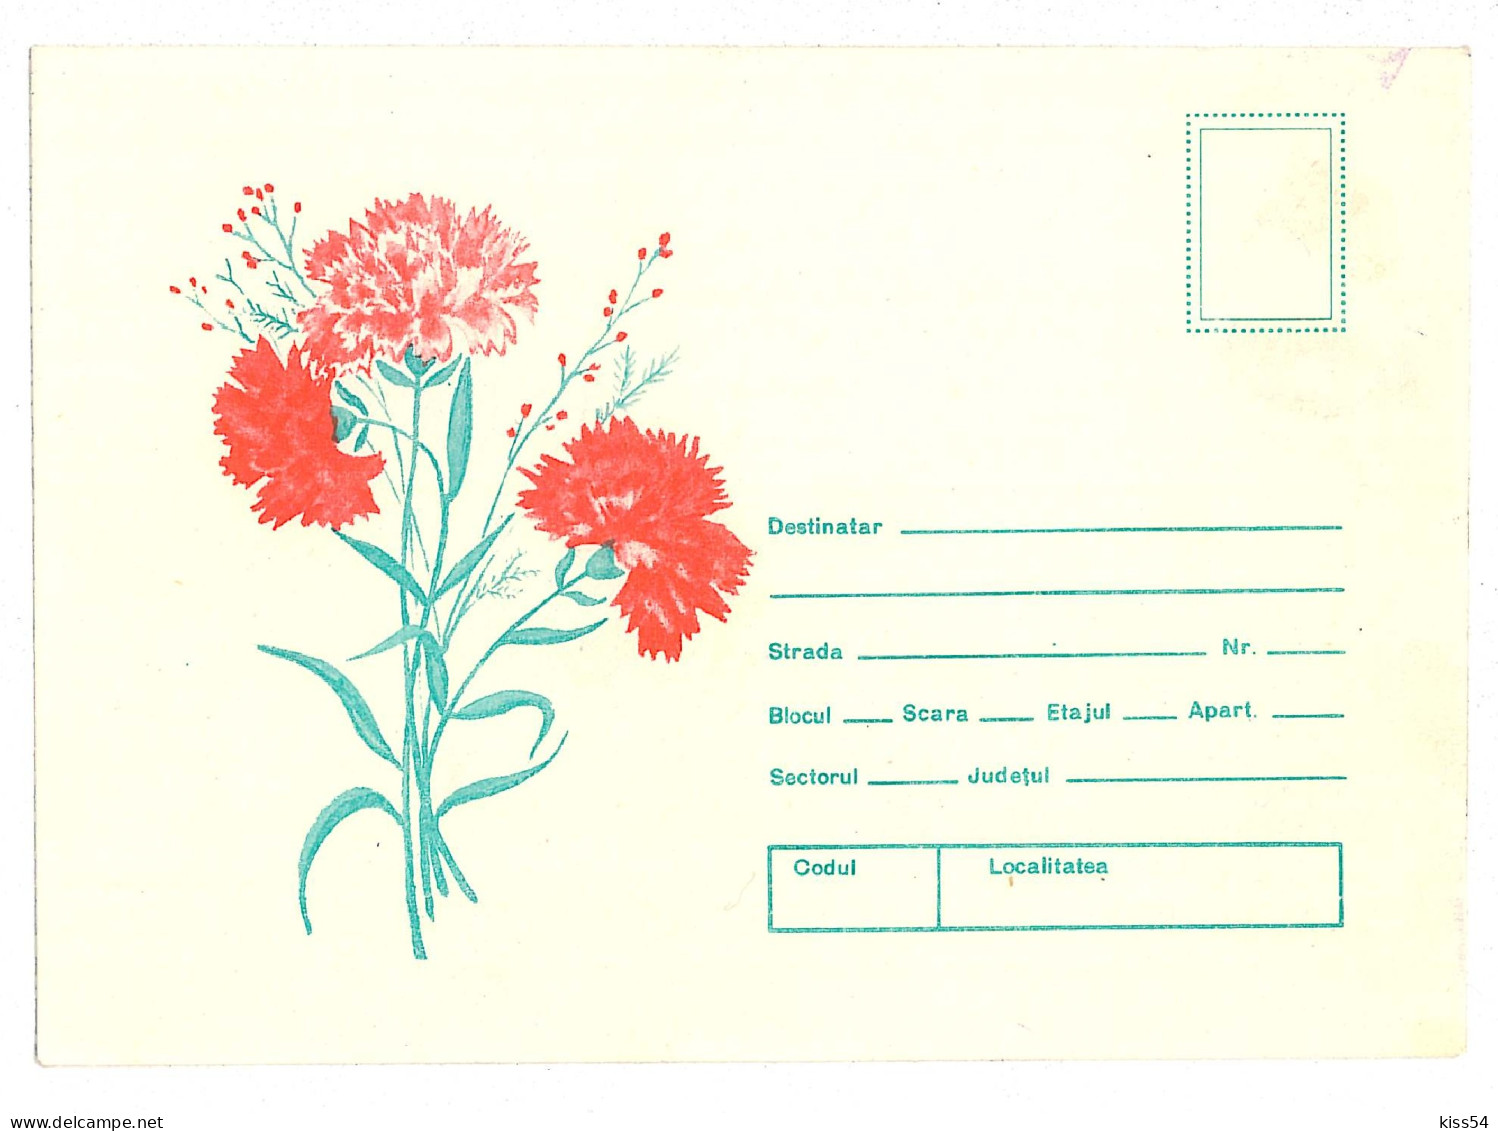 IP 92 - 82a FLOWERS, Carnations, Romania - Stationery - Unused - 1992 - Ganzsachen